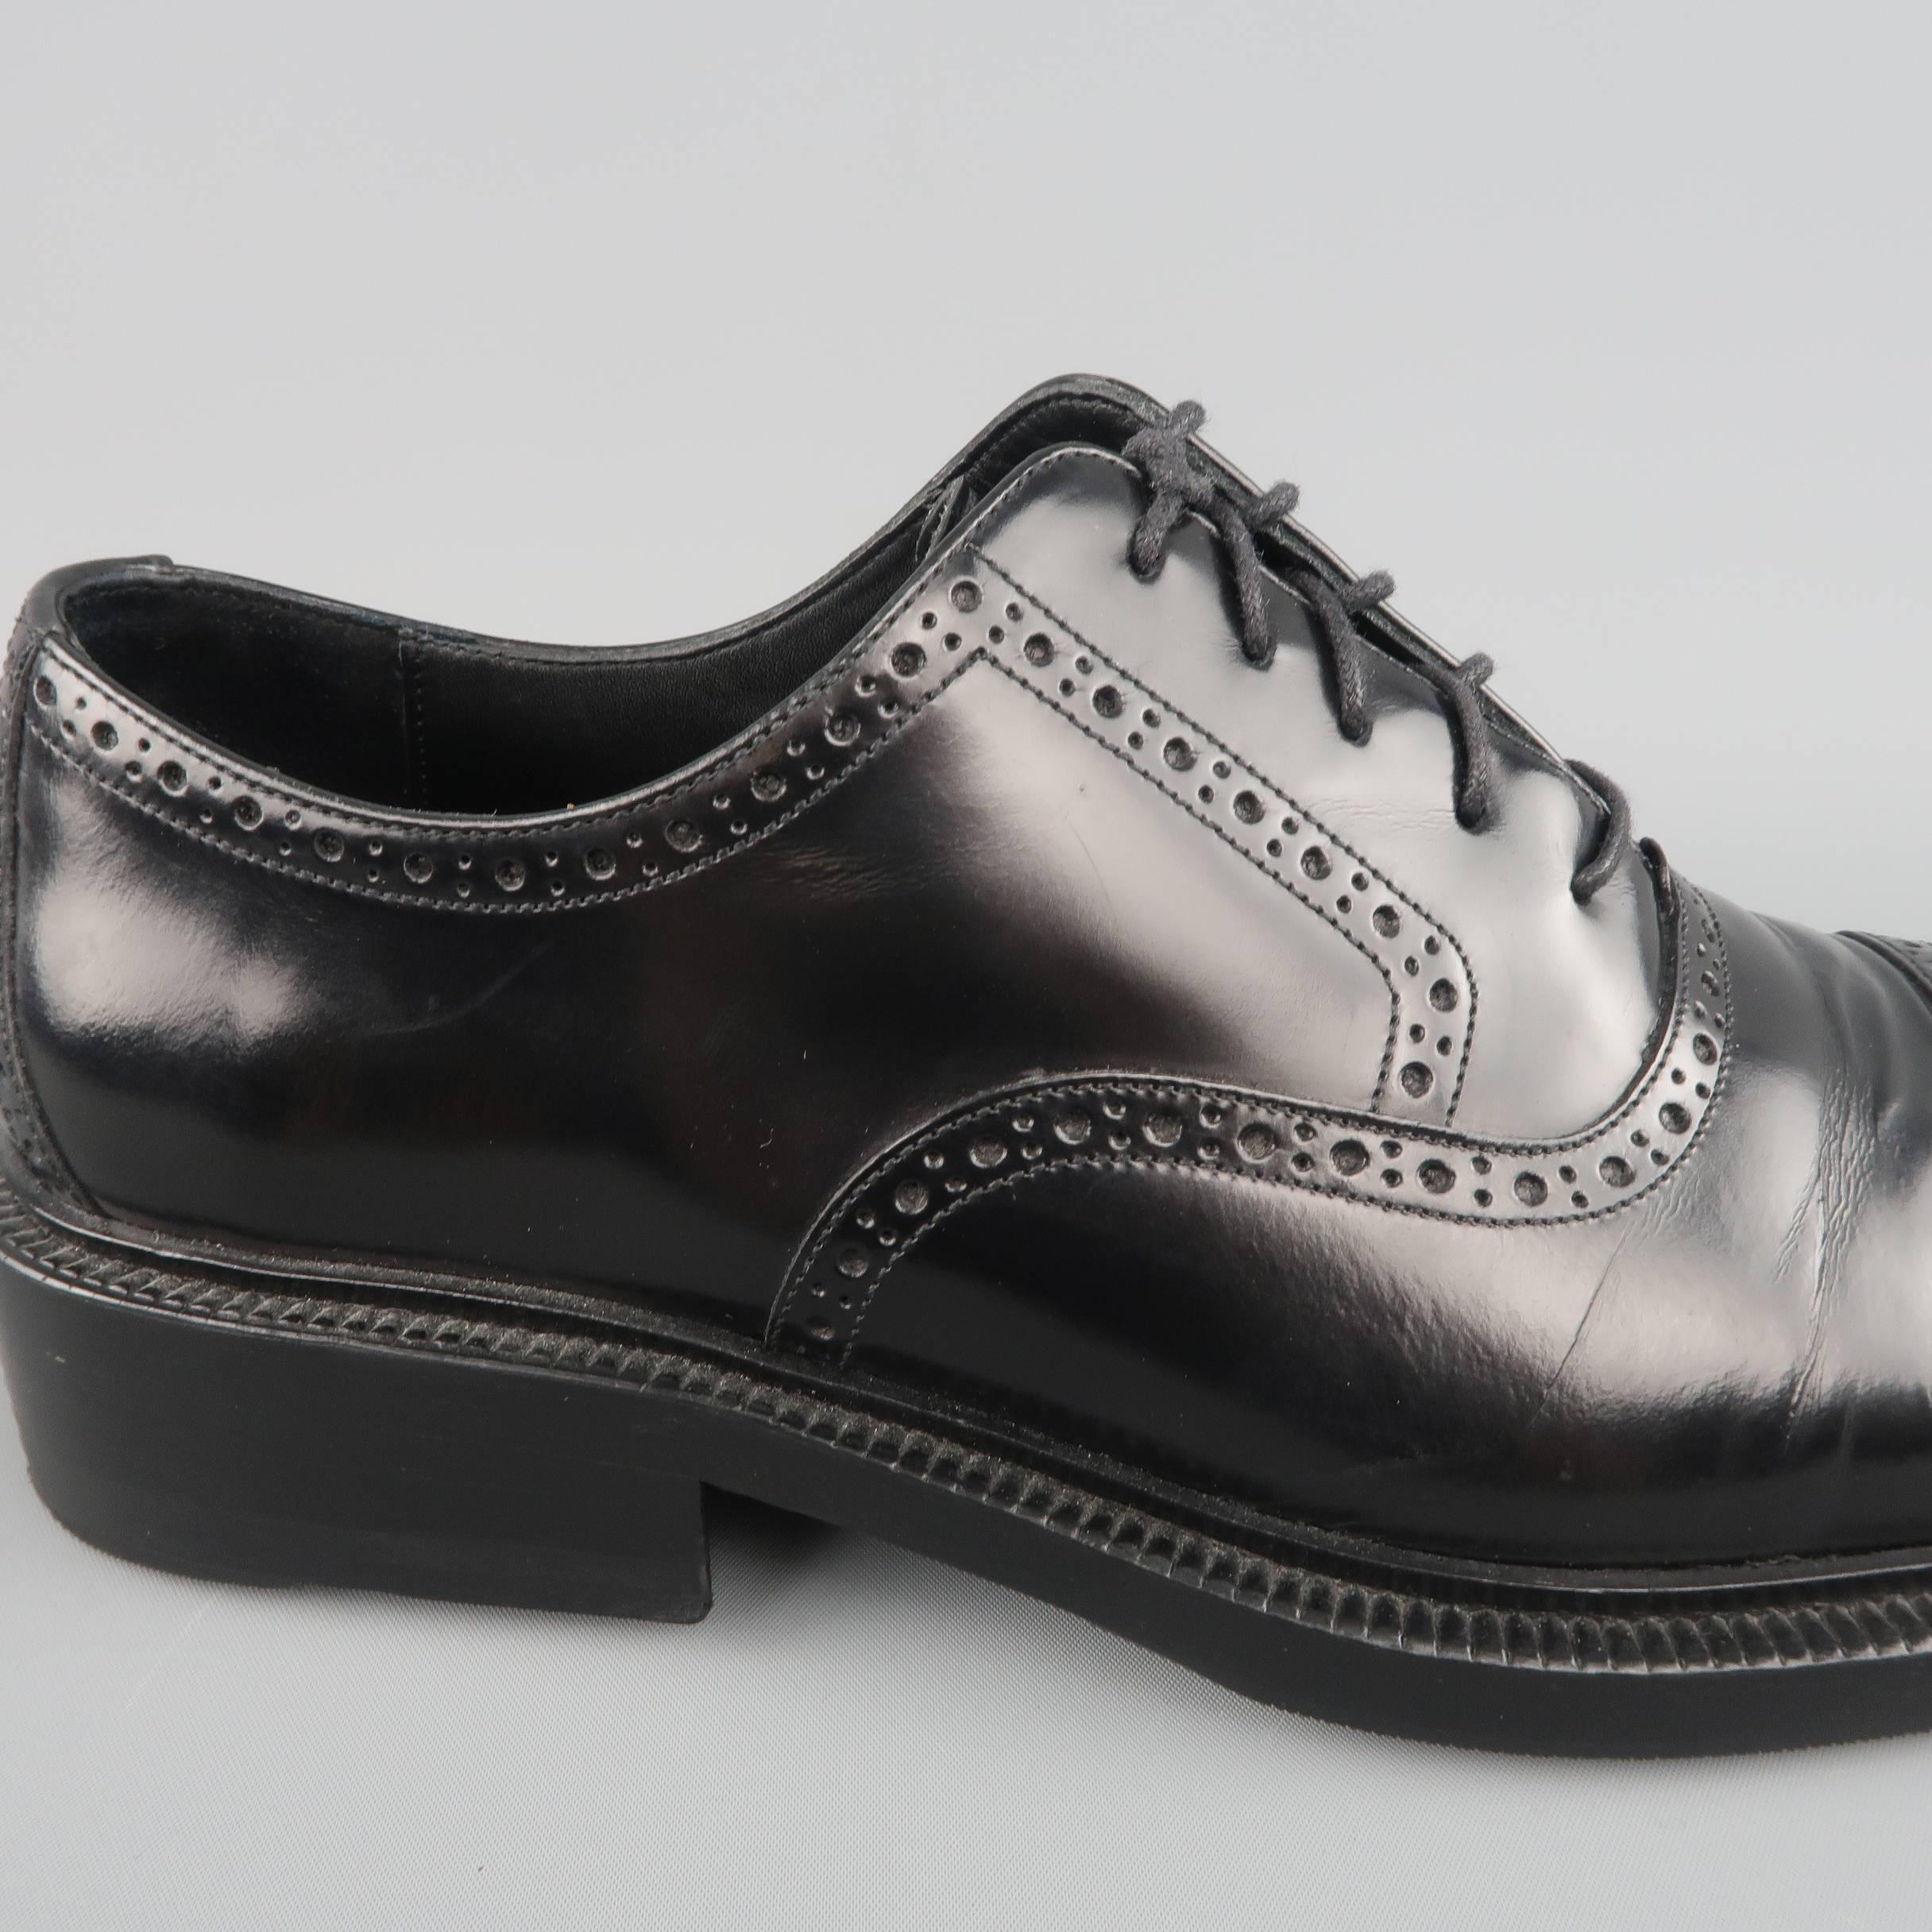 GUCCI dress shoes come in polished black leather and feature a square cap toe and perforated brogue details throughout. Made in Italy.
 
Good Pre-Owned Condition.
Marked: UK 8 D
 
Outsole: 12 x 4 in.

SKU: 84233